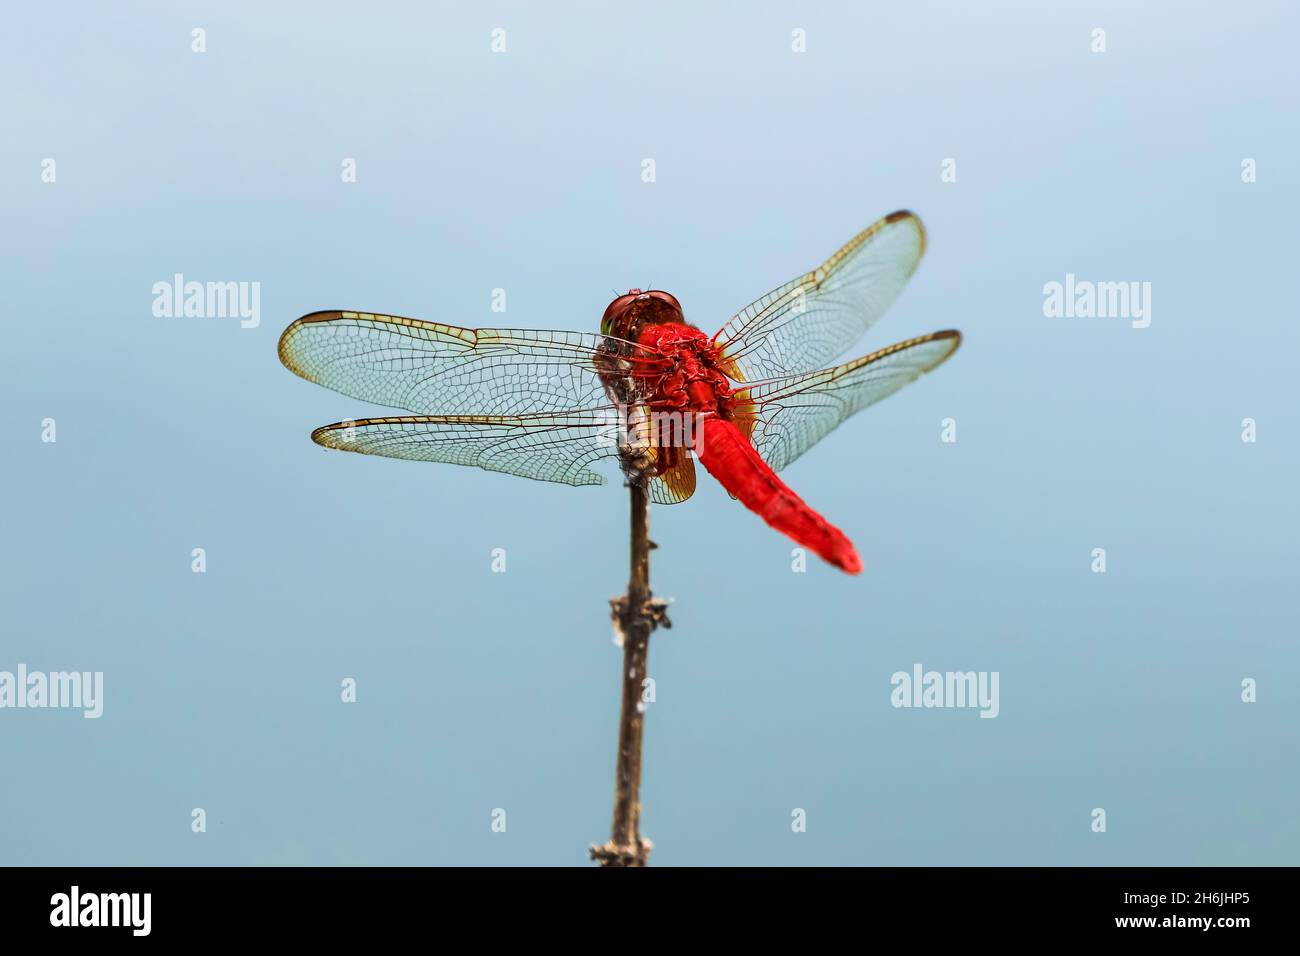 Scarlet Basker dragonfly (Urothemis signata) by fish pond, Rammang-Rammang, Maros, South Sulawesi, Indonesia, Southeast Asia, Asia Stock Photo